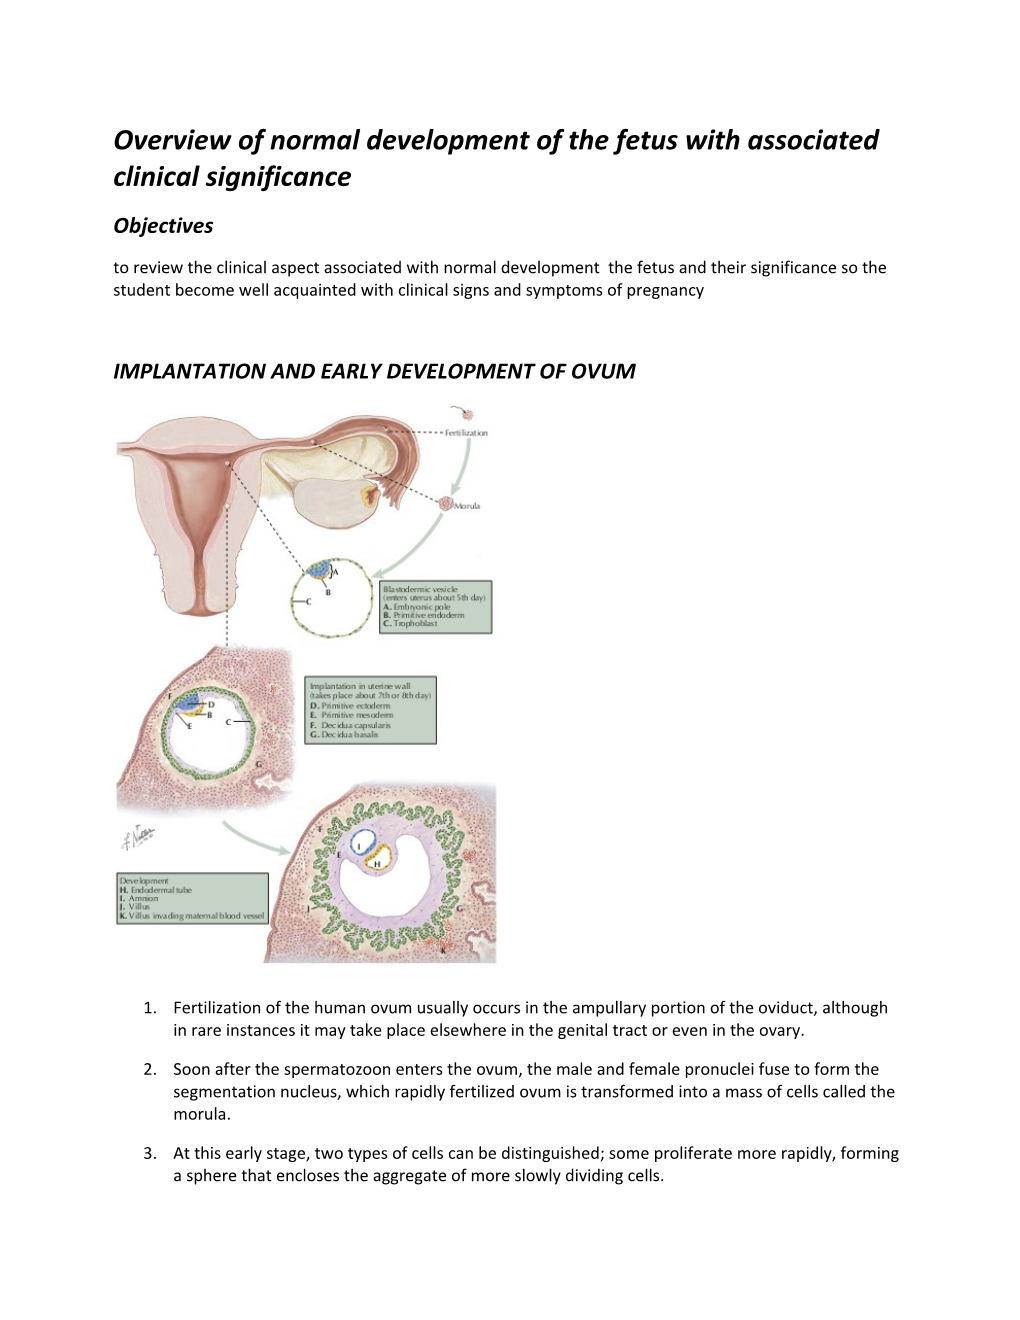 Overview of Normal Development of the Fetus with Associated Clinical Significance